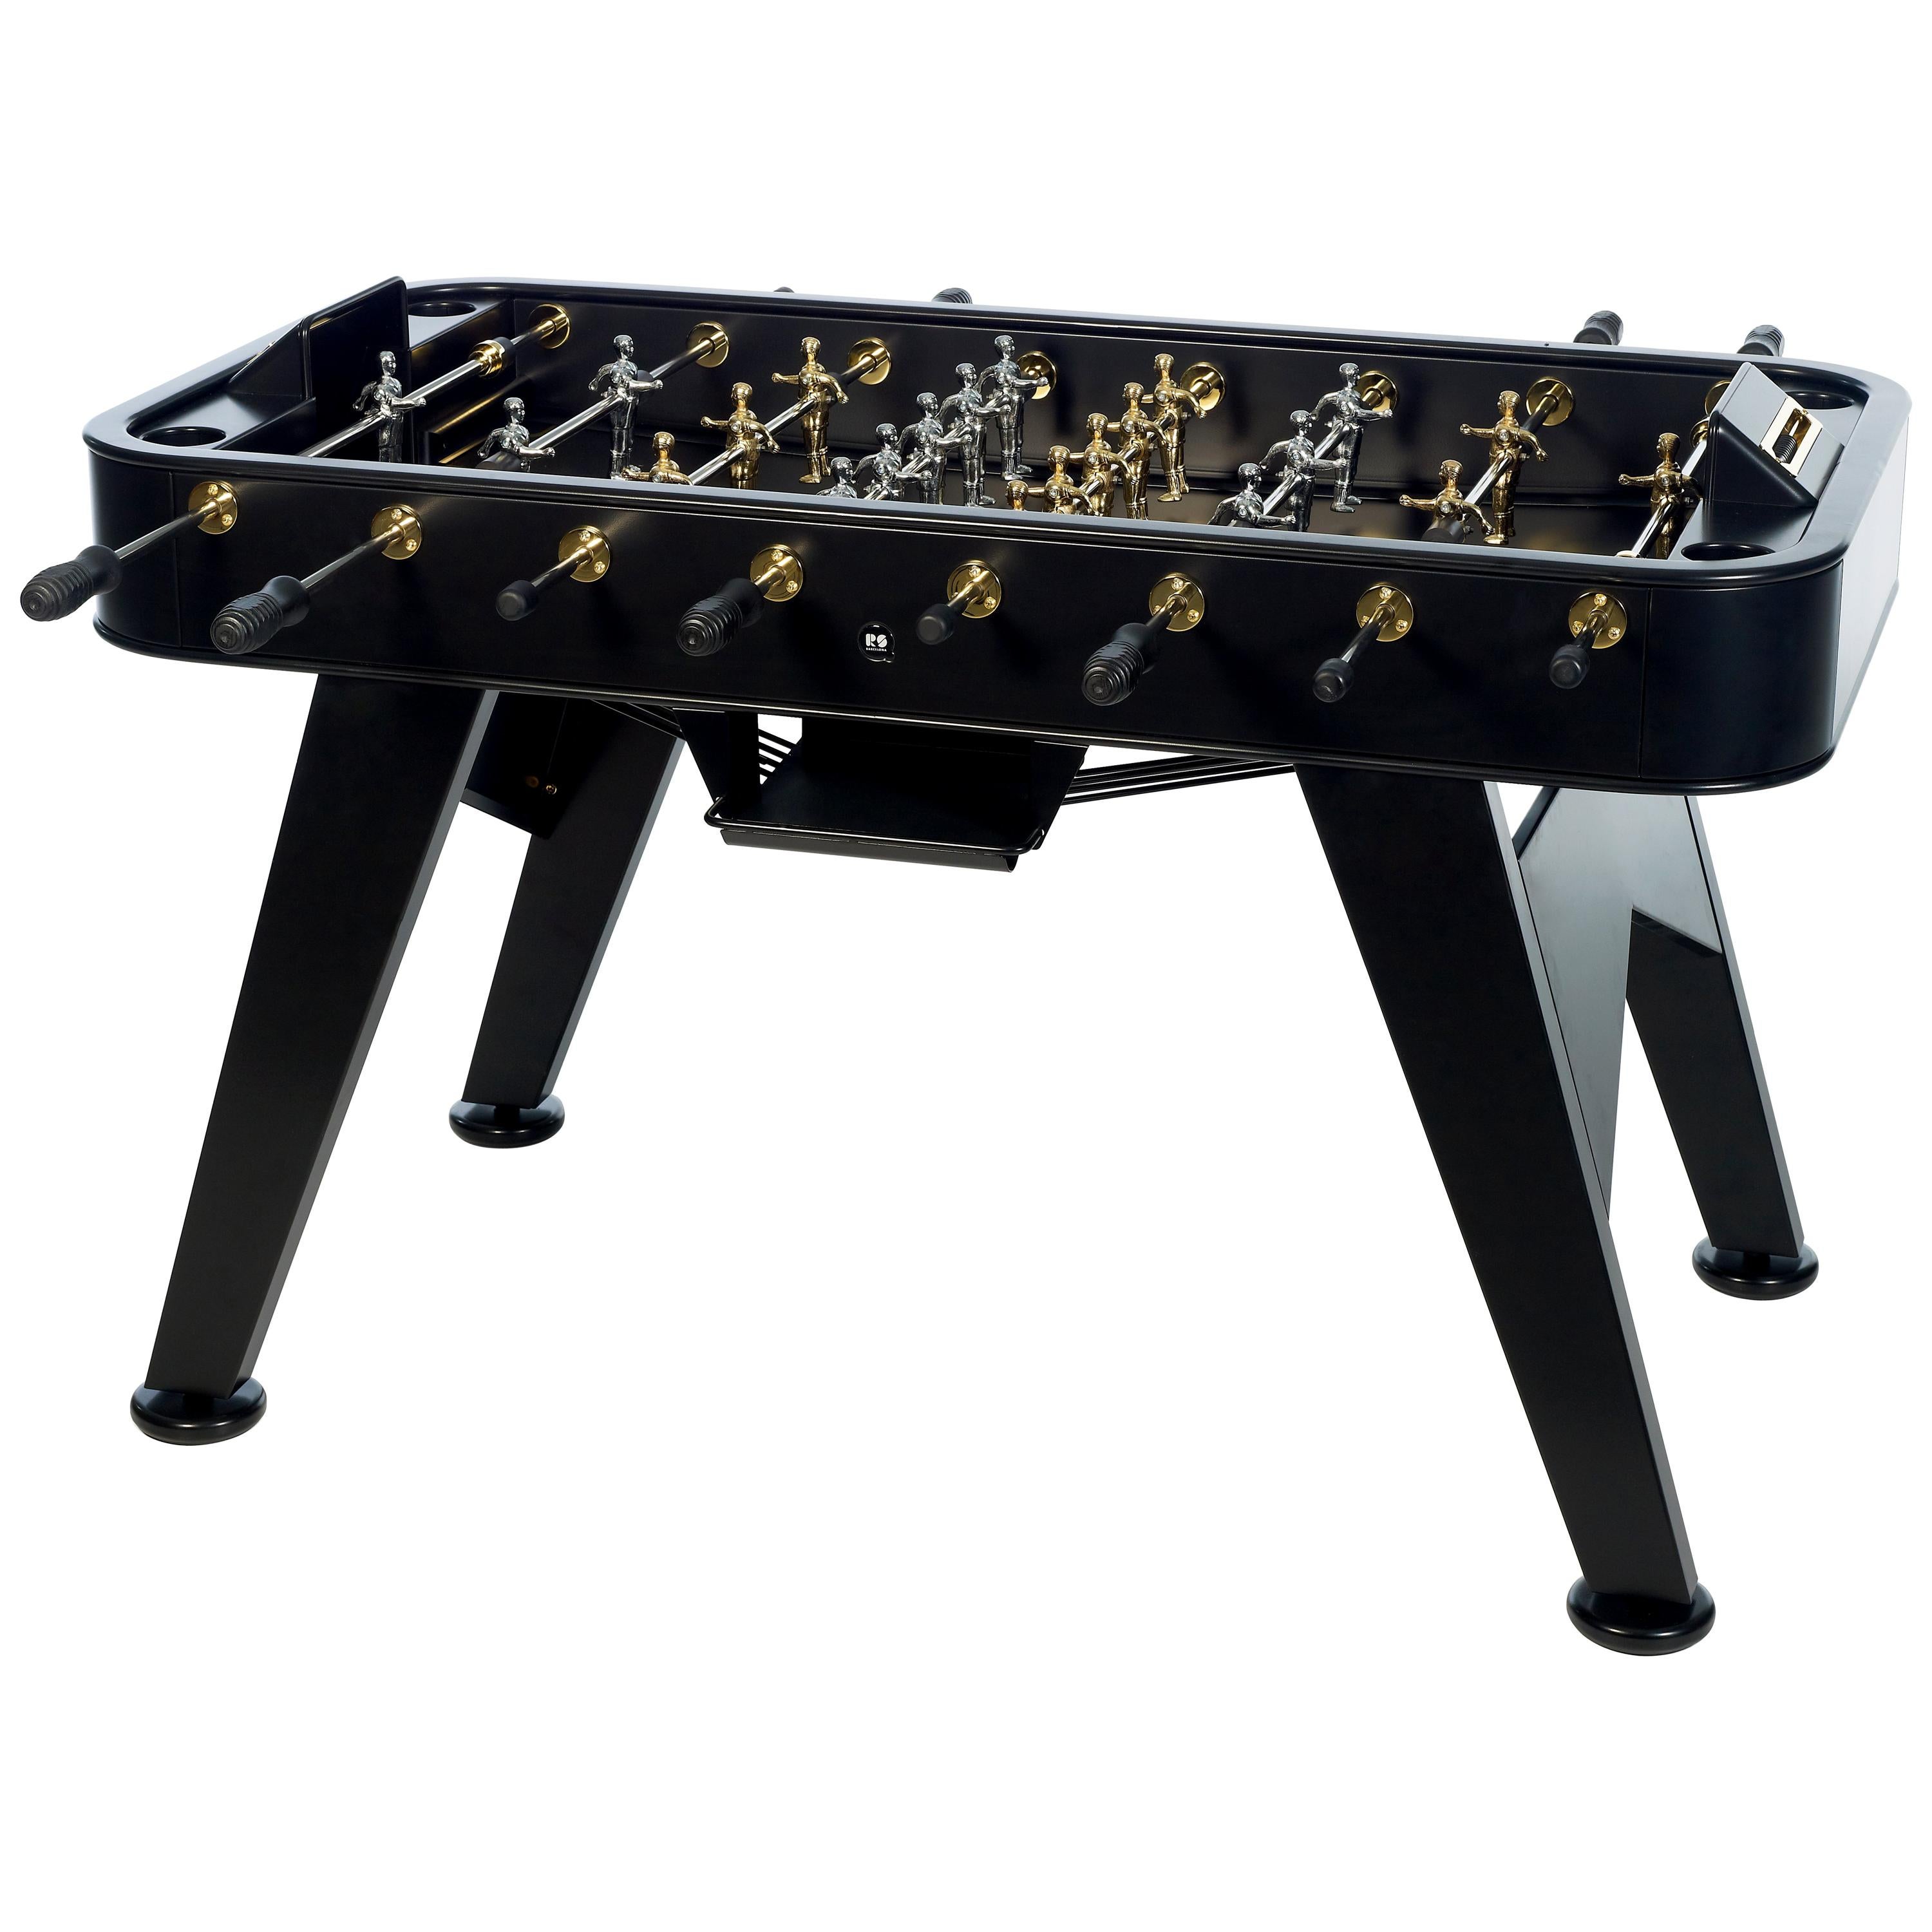 RS Barcelona RS2 Gold Edition Football Table in Black by Rafael Rodriguez For Sale